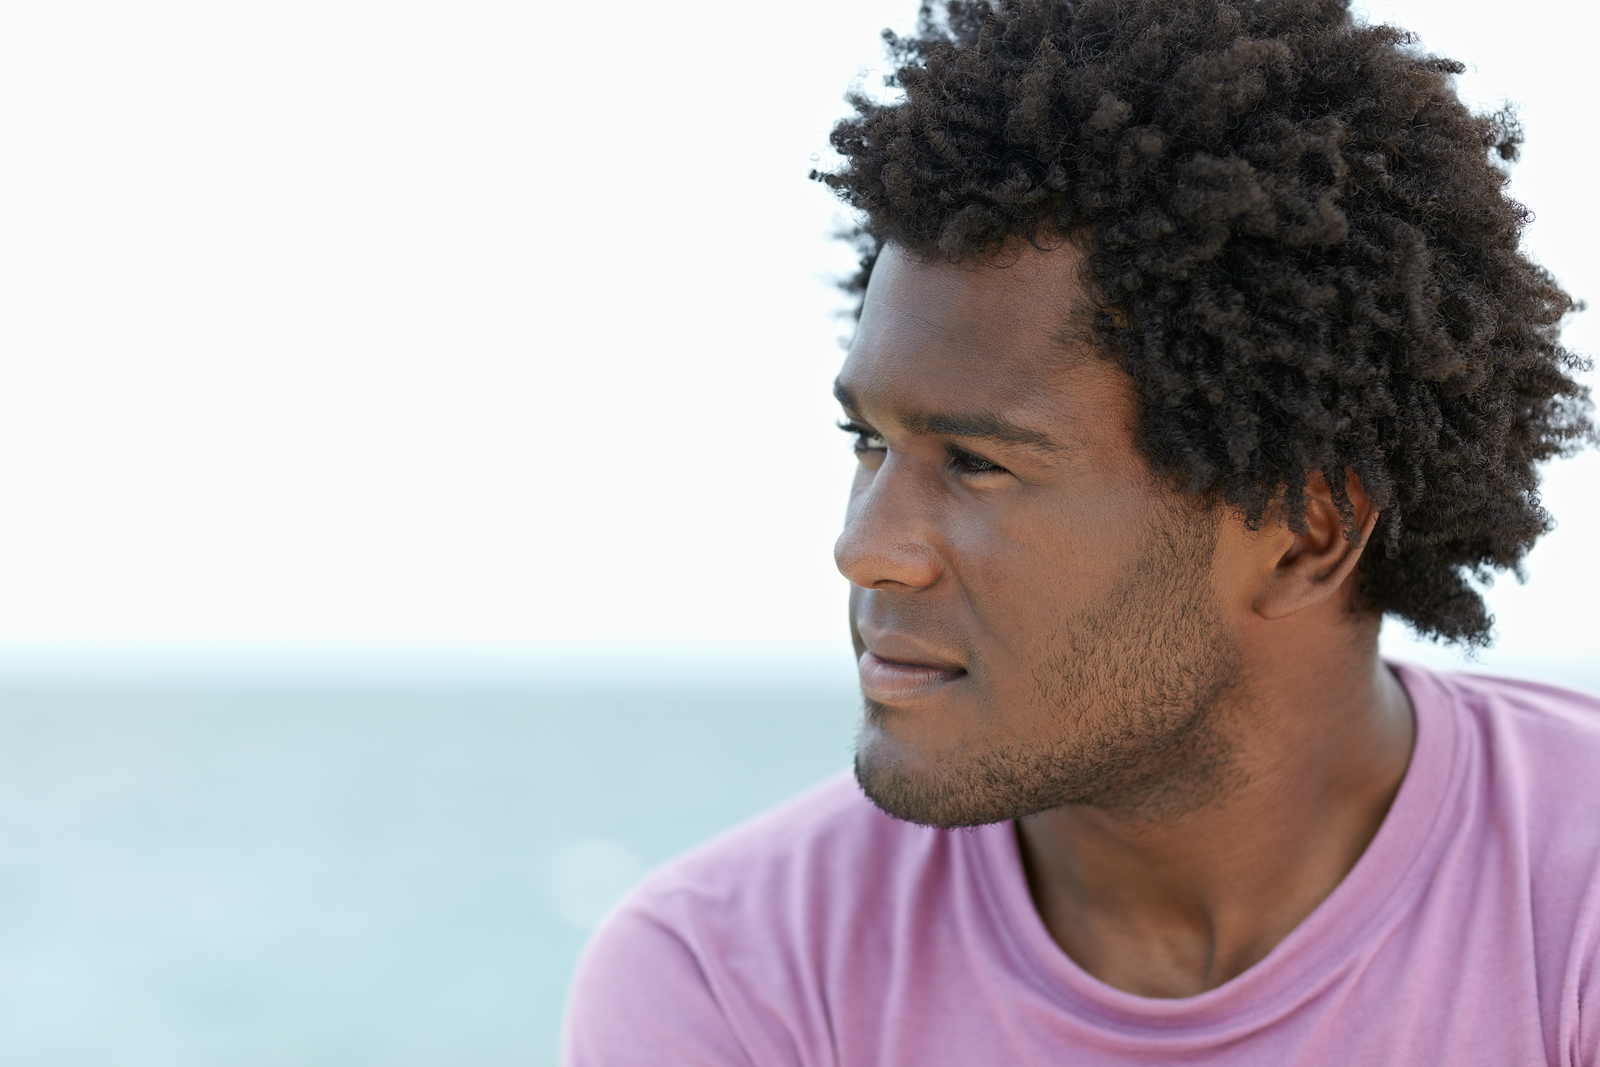 A multi ethnic man looking into the distance wearing a purple shirt and he has an afro.